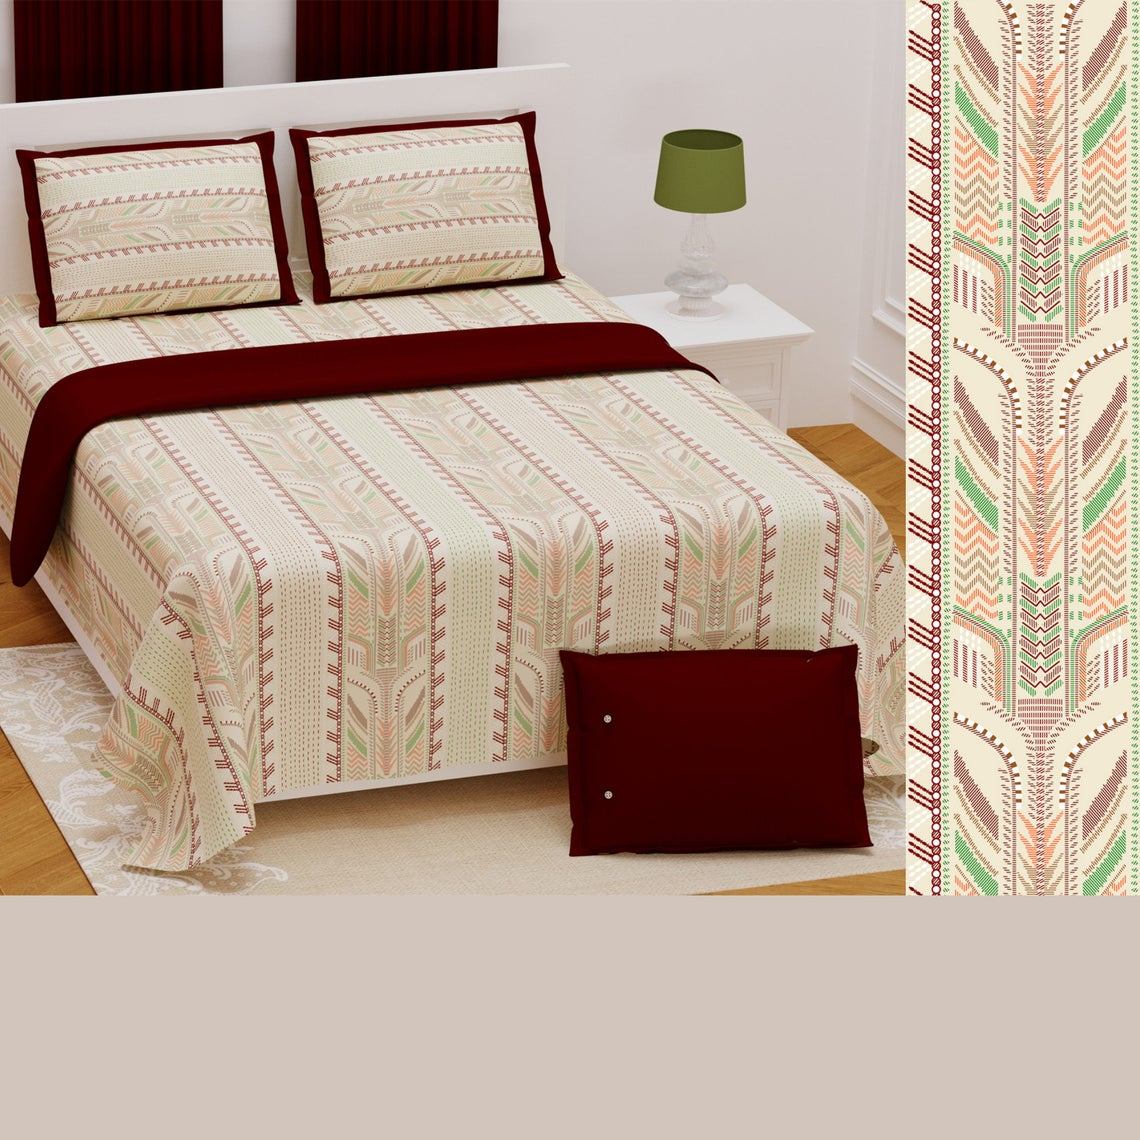 Buy Stripe Kantha Bedding Bedspreads With 2 Pillow Covers